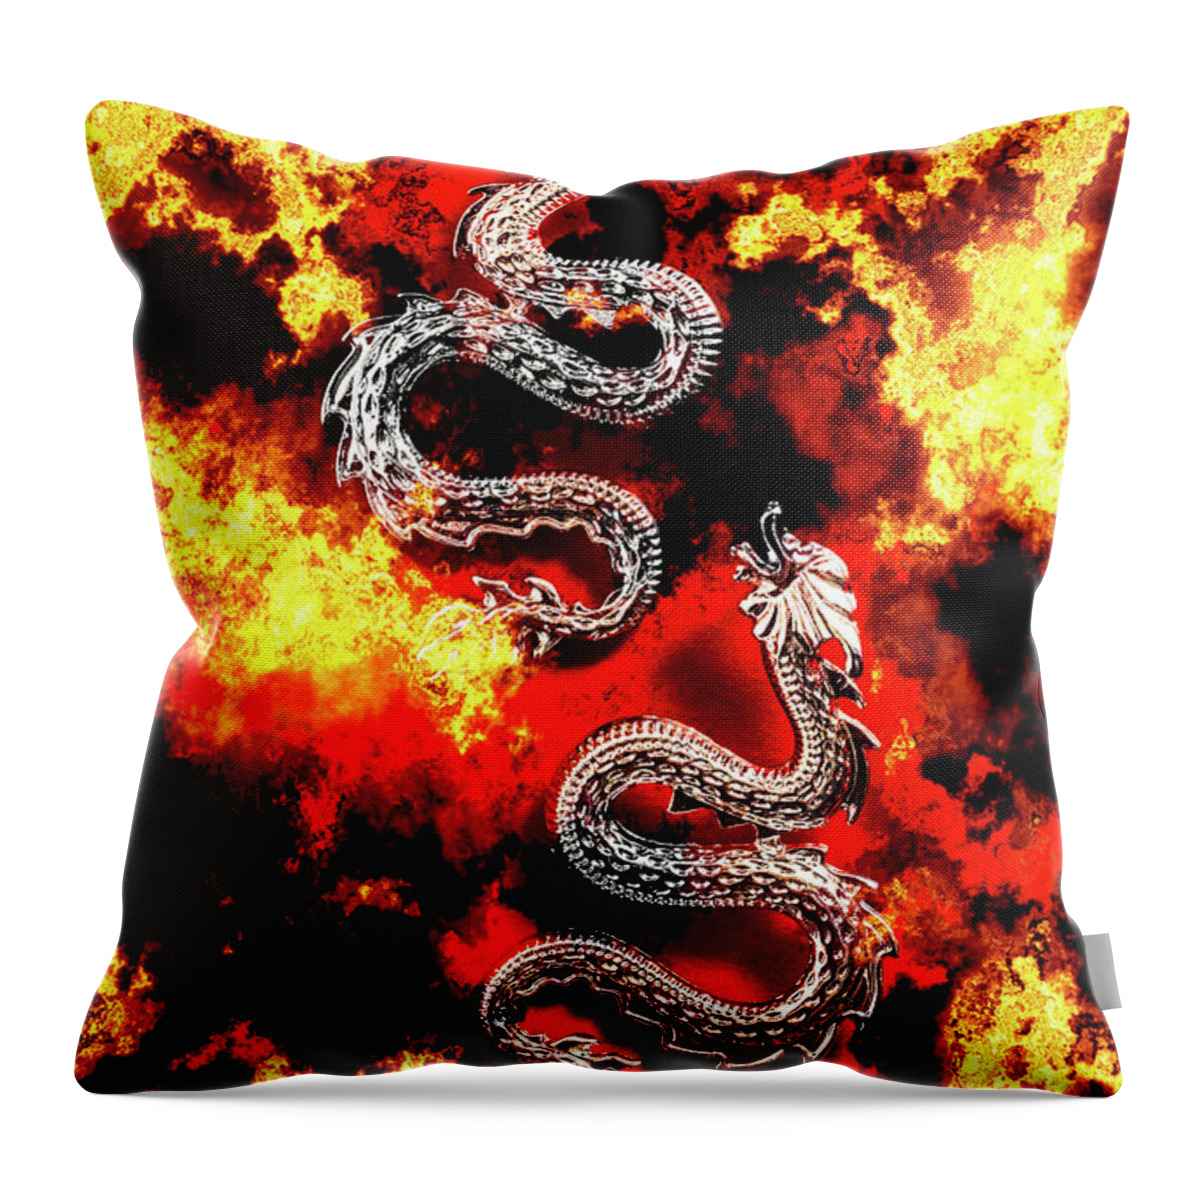 Dragon Throw Pillow featuring the photograph Double Dragon by Jorgo Photography